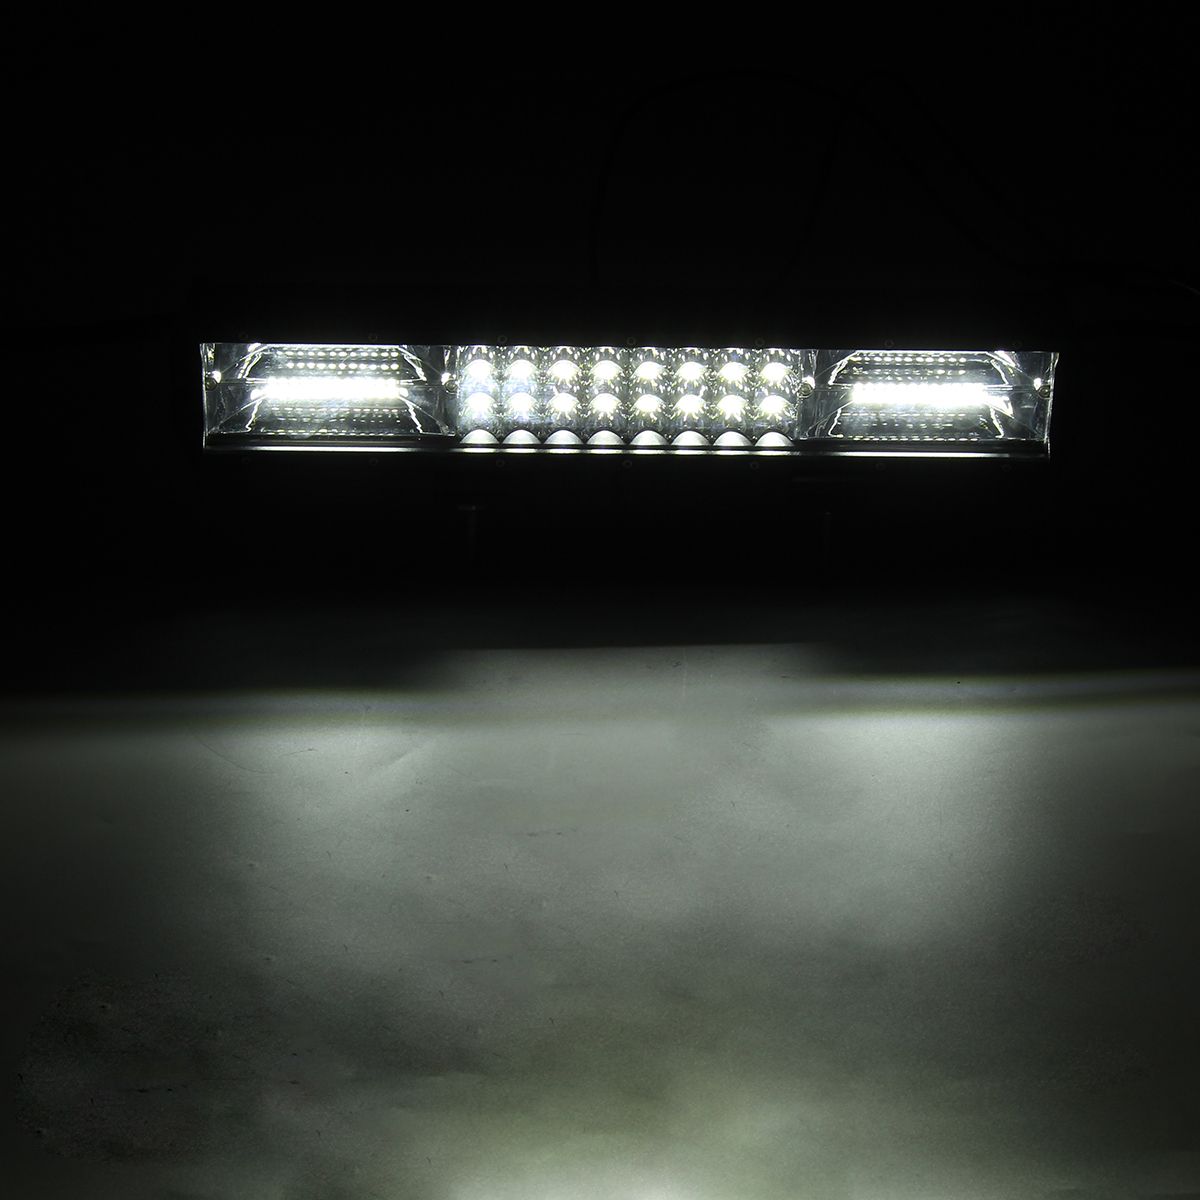 145Inch-216W-LED-Work-Light-Bar-Strobe-Flash-Lamp-Waterproof-Dual-Color-WhiteAmber-10-30V-for-Offroa-1609260